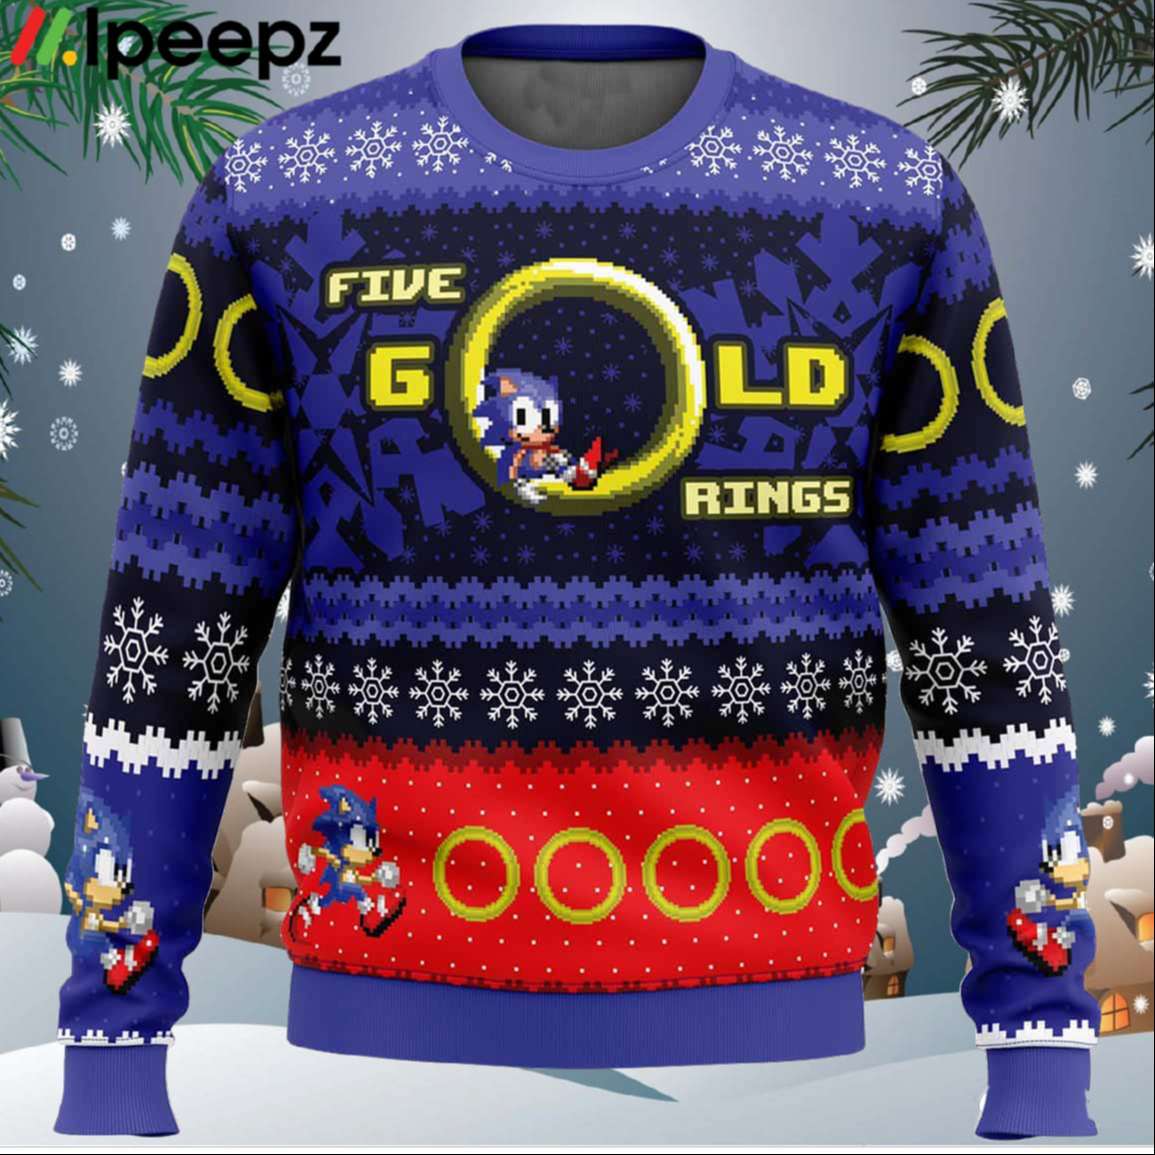 https://ipeepz.com/wp-content/uploads/2023/11/5-Gold-Rings-Sonic-the-Hedgehog-Ugly-Christmas-Sweater.jpg